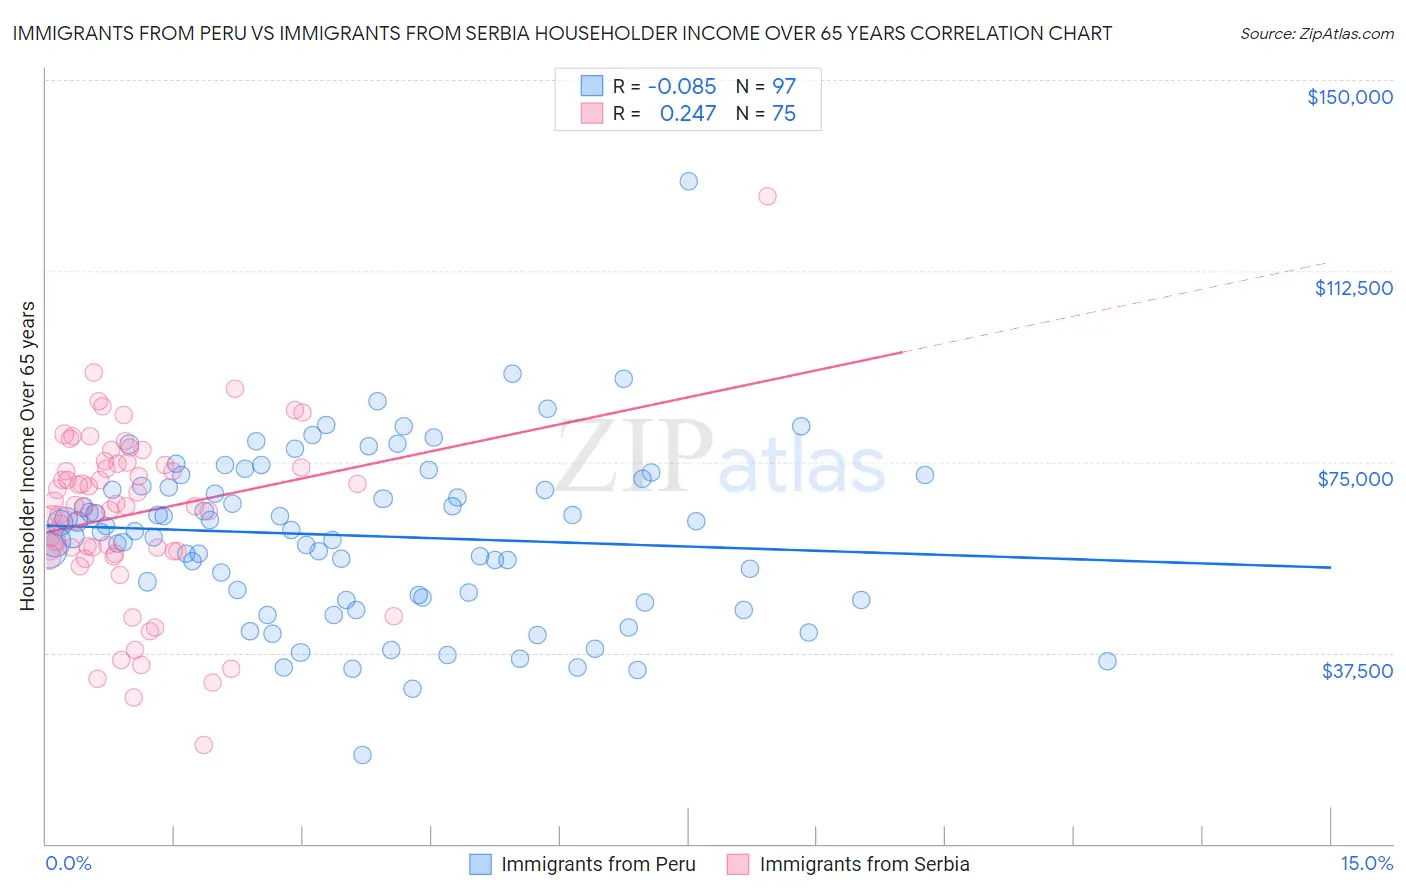 Immigrants from Peru vs Immigrants from Serbia Householder Income Over 65 years